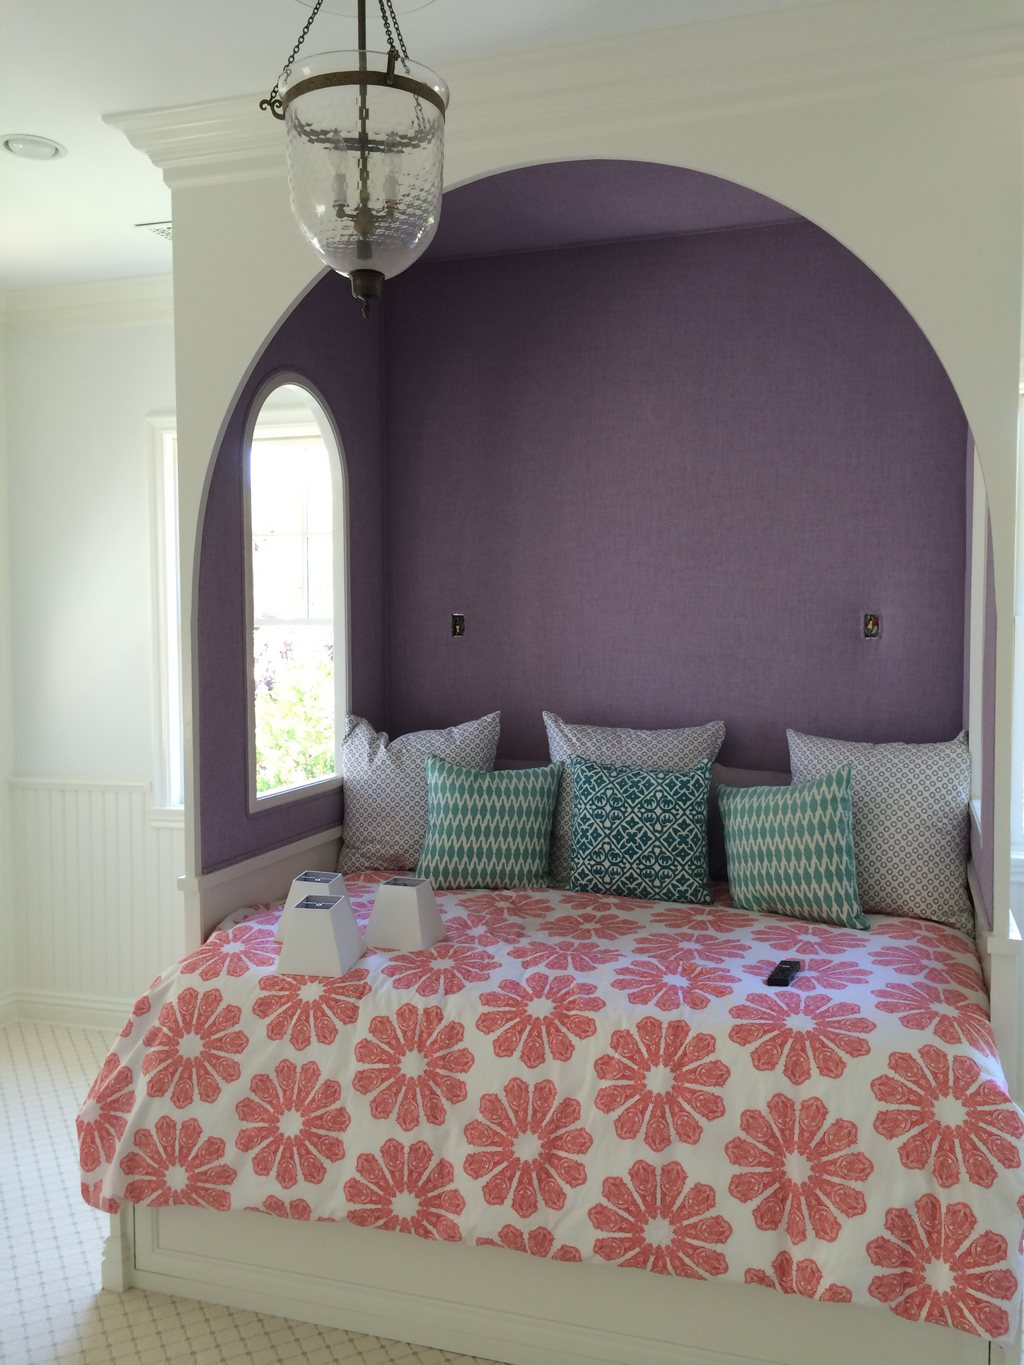 Girl's bed good enough for a princess - Pacific Palisades residence